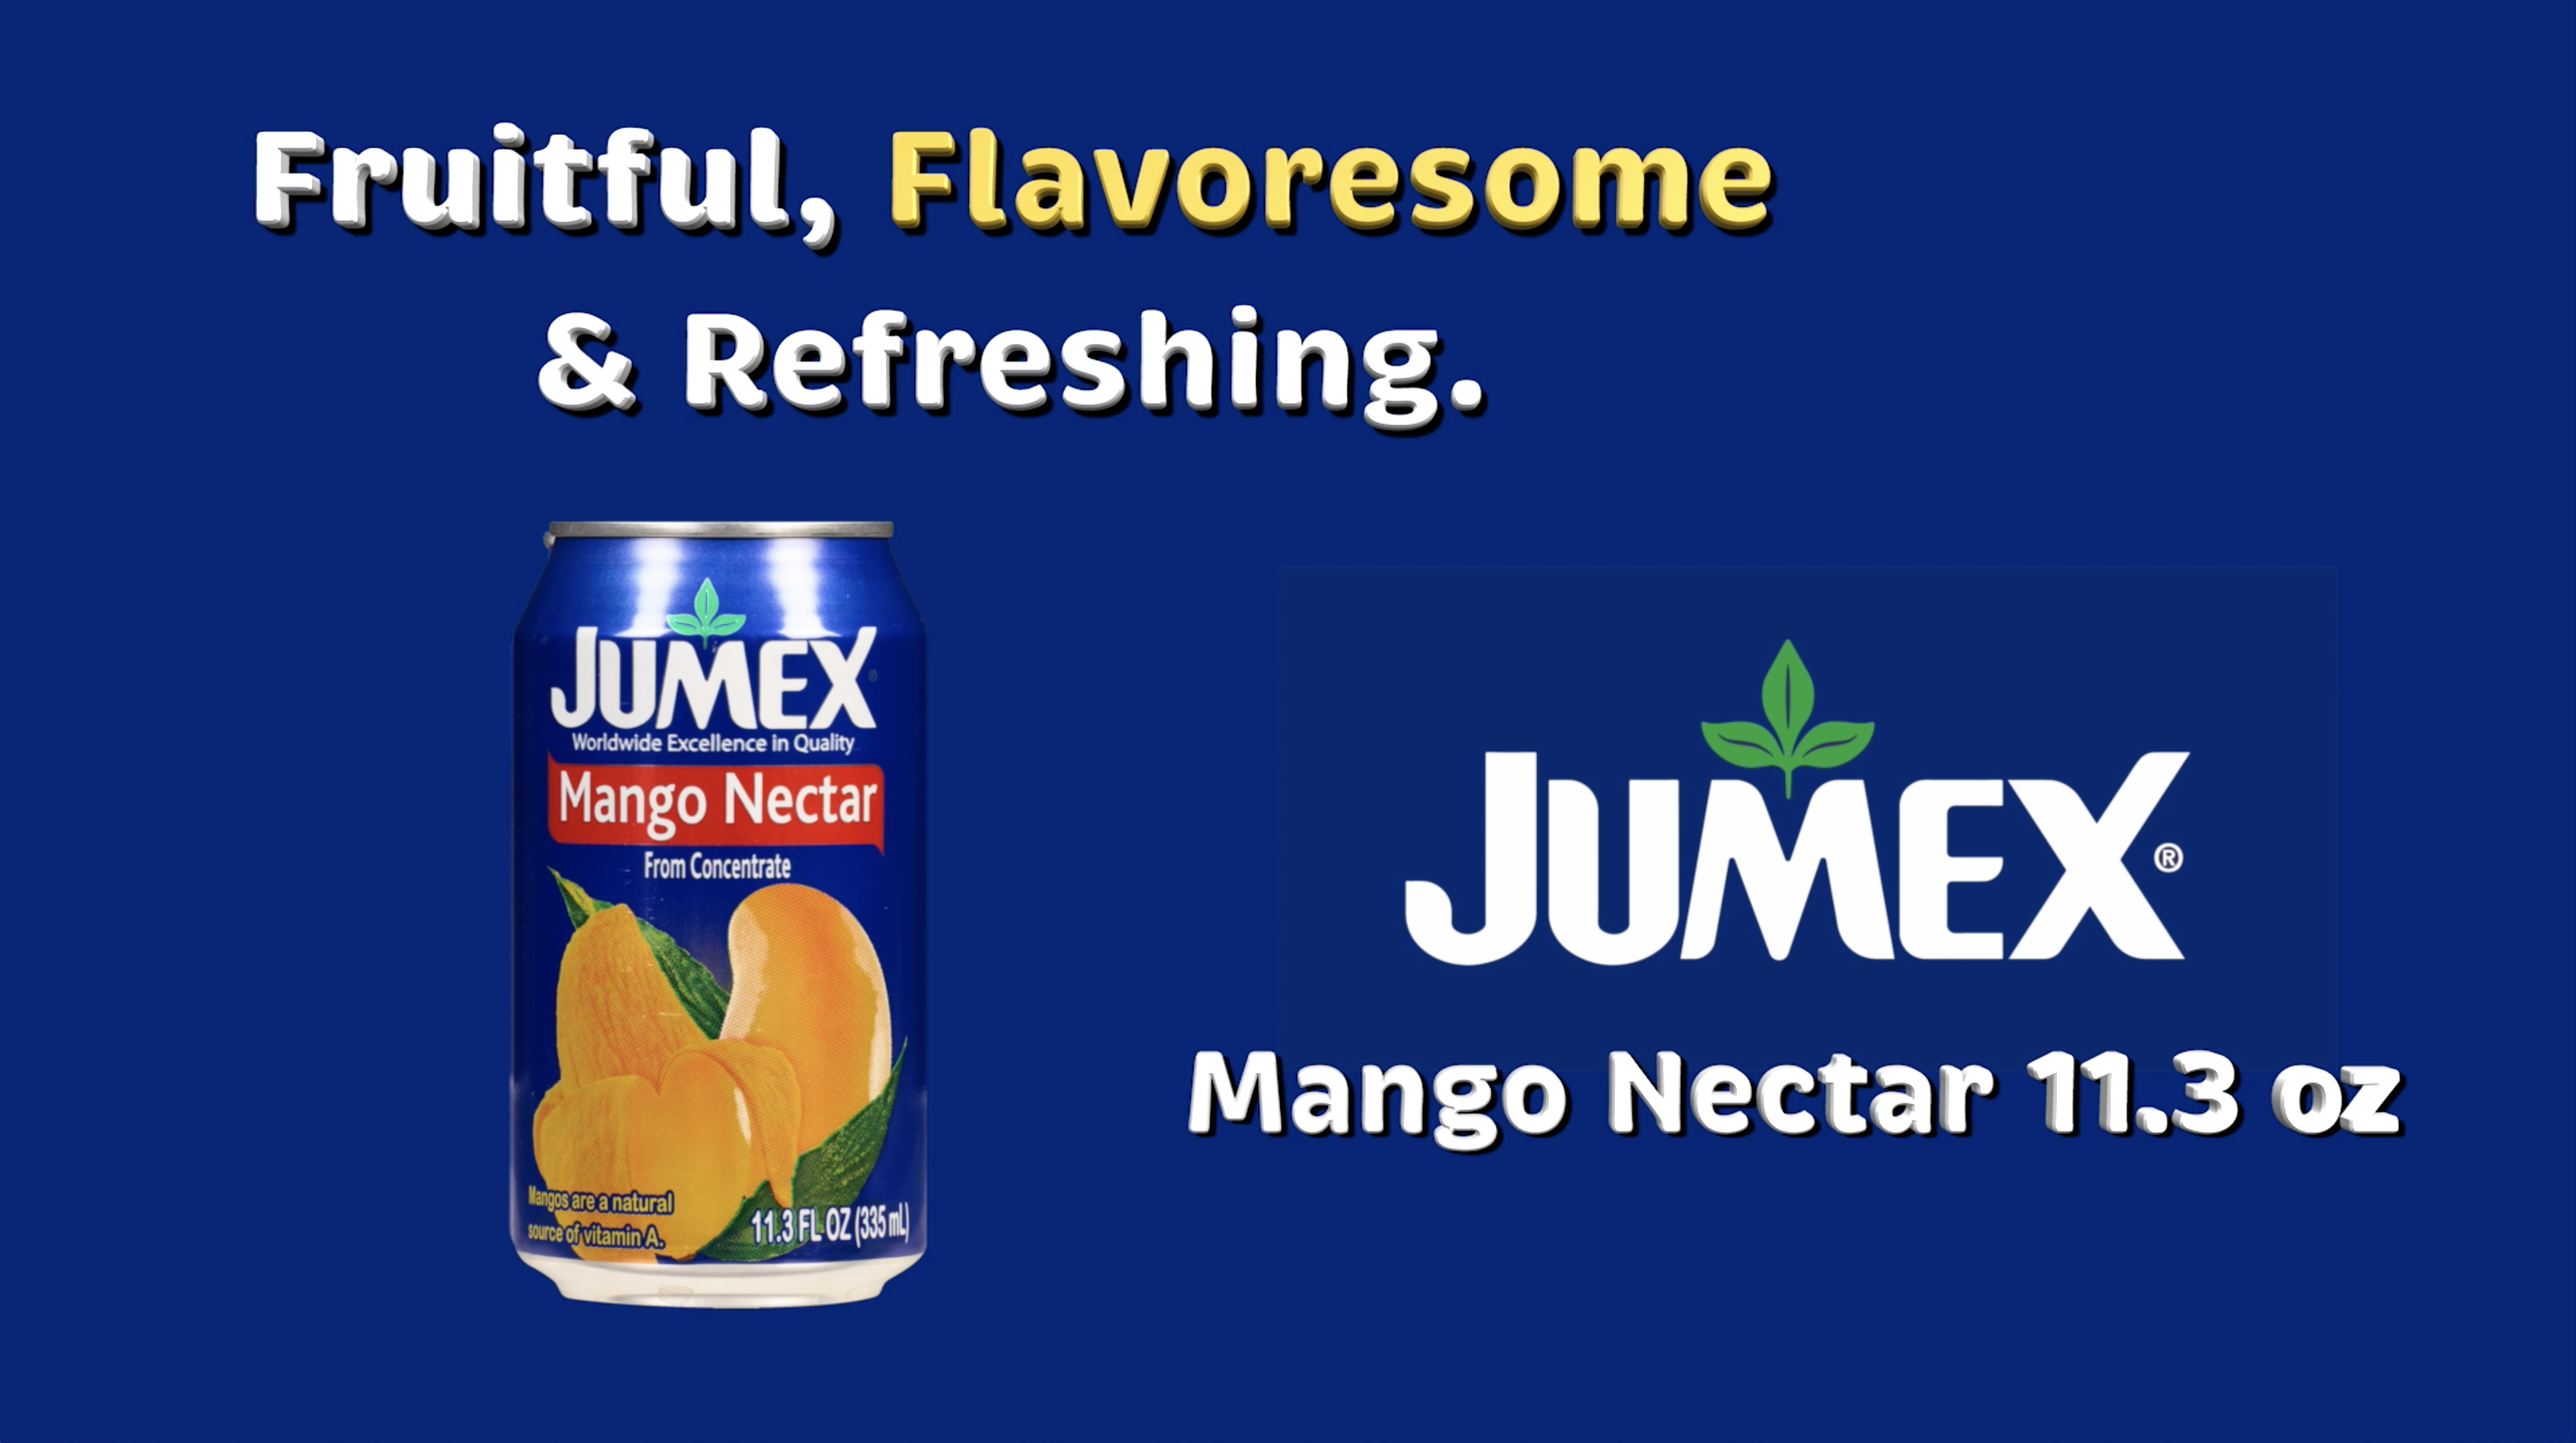 Jumex Mango Nectar from Concentrate, 11.3 Fl. oz. - image 2 of 6